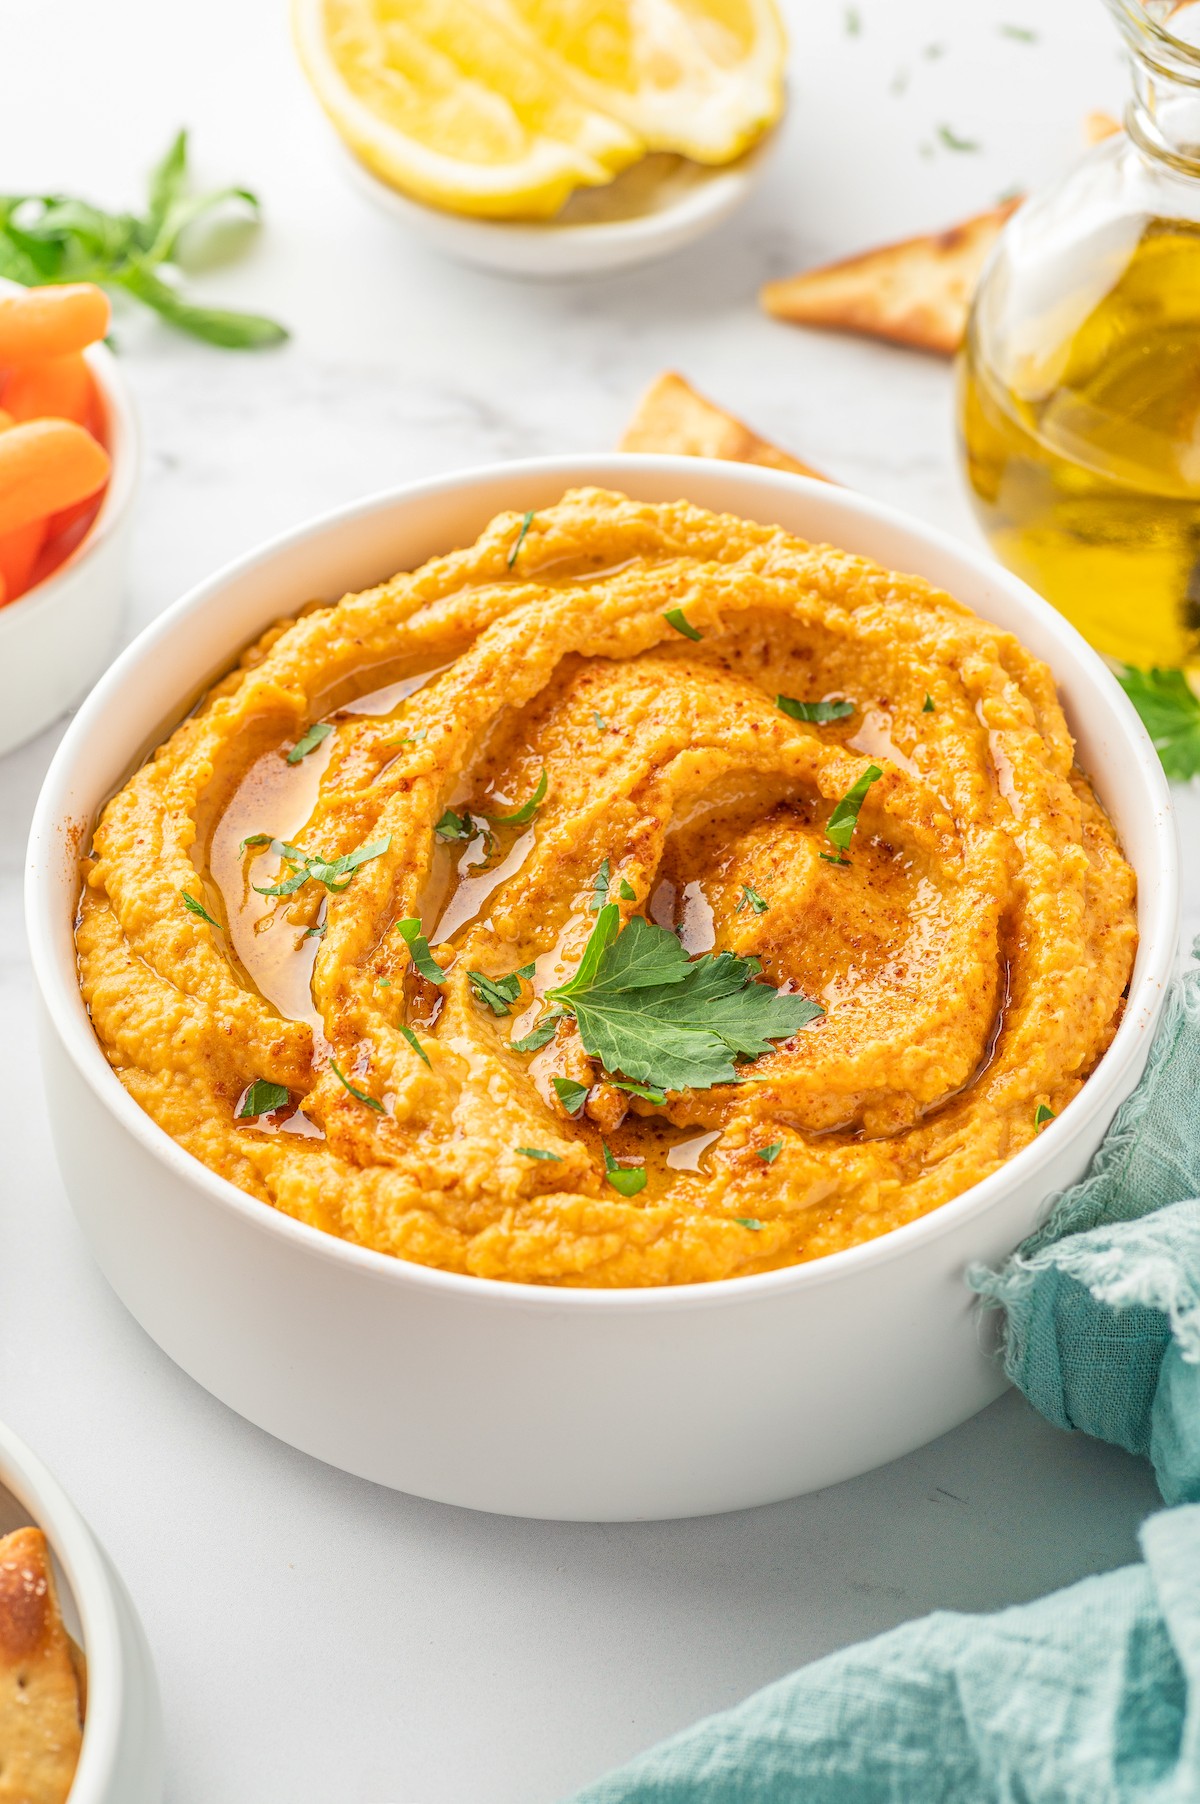 Bowl of sweet potato hummus with a drizzle of olive oil on top.